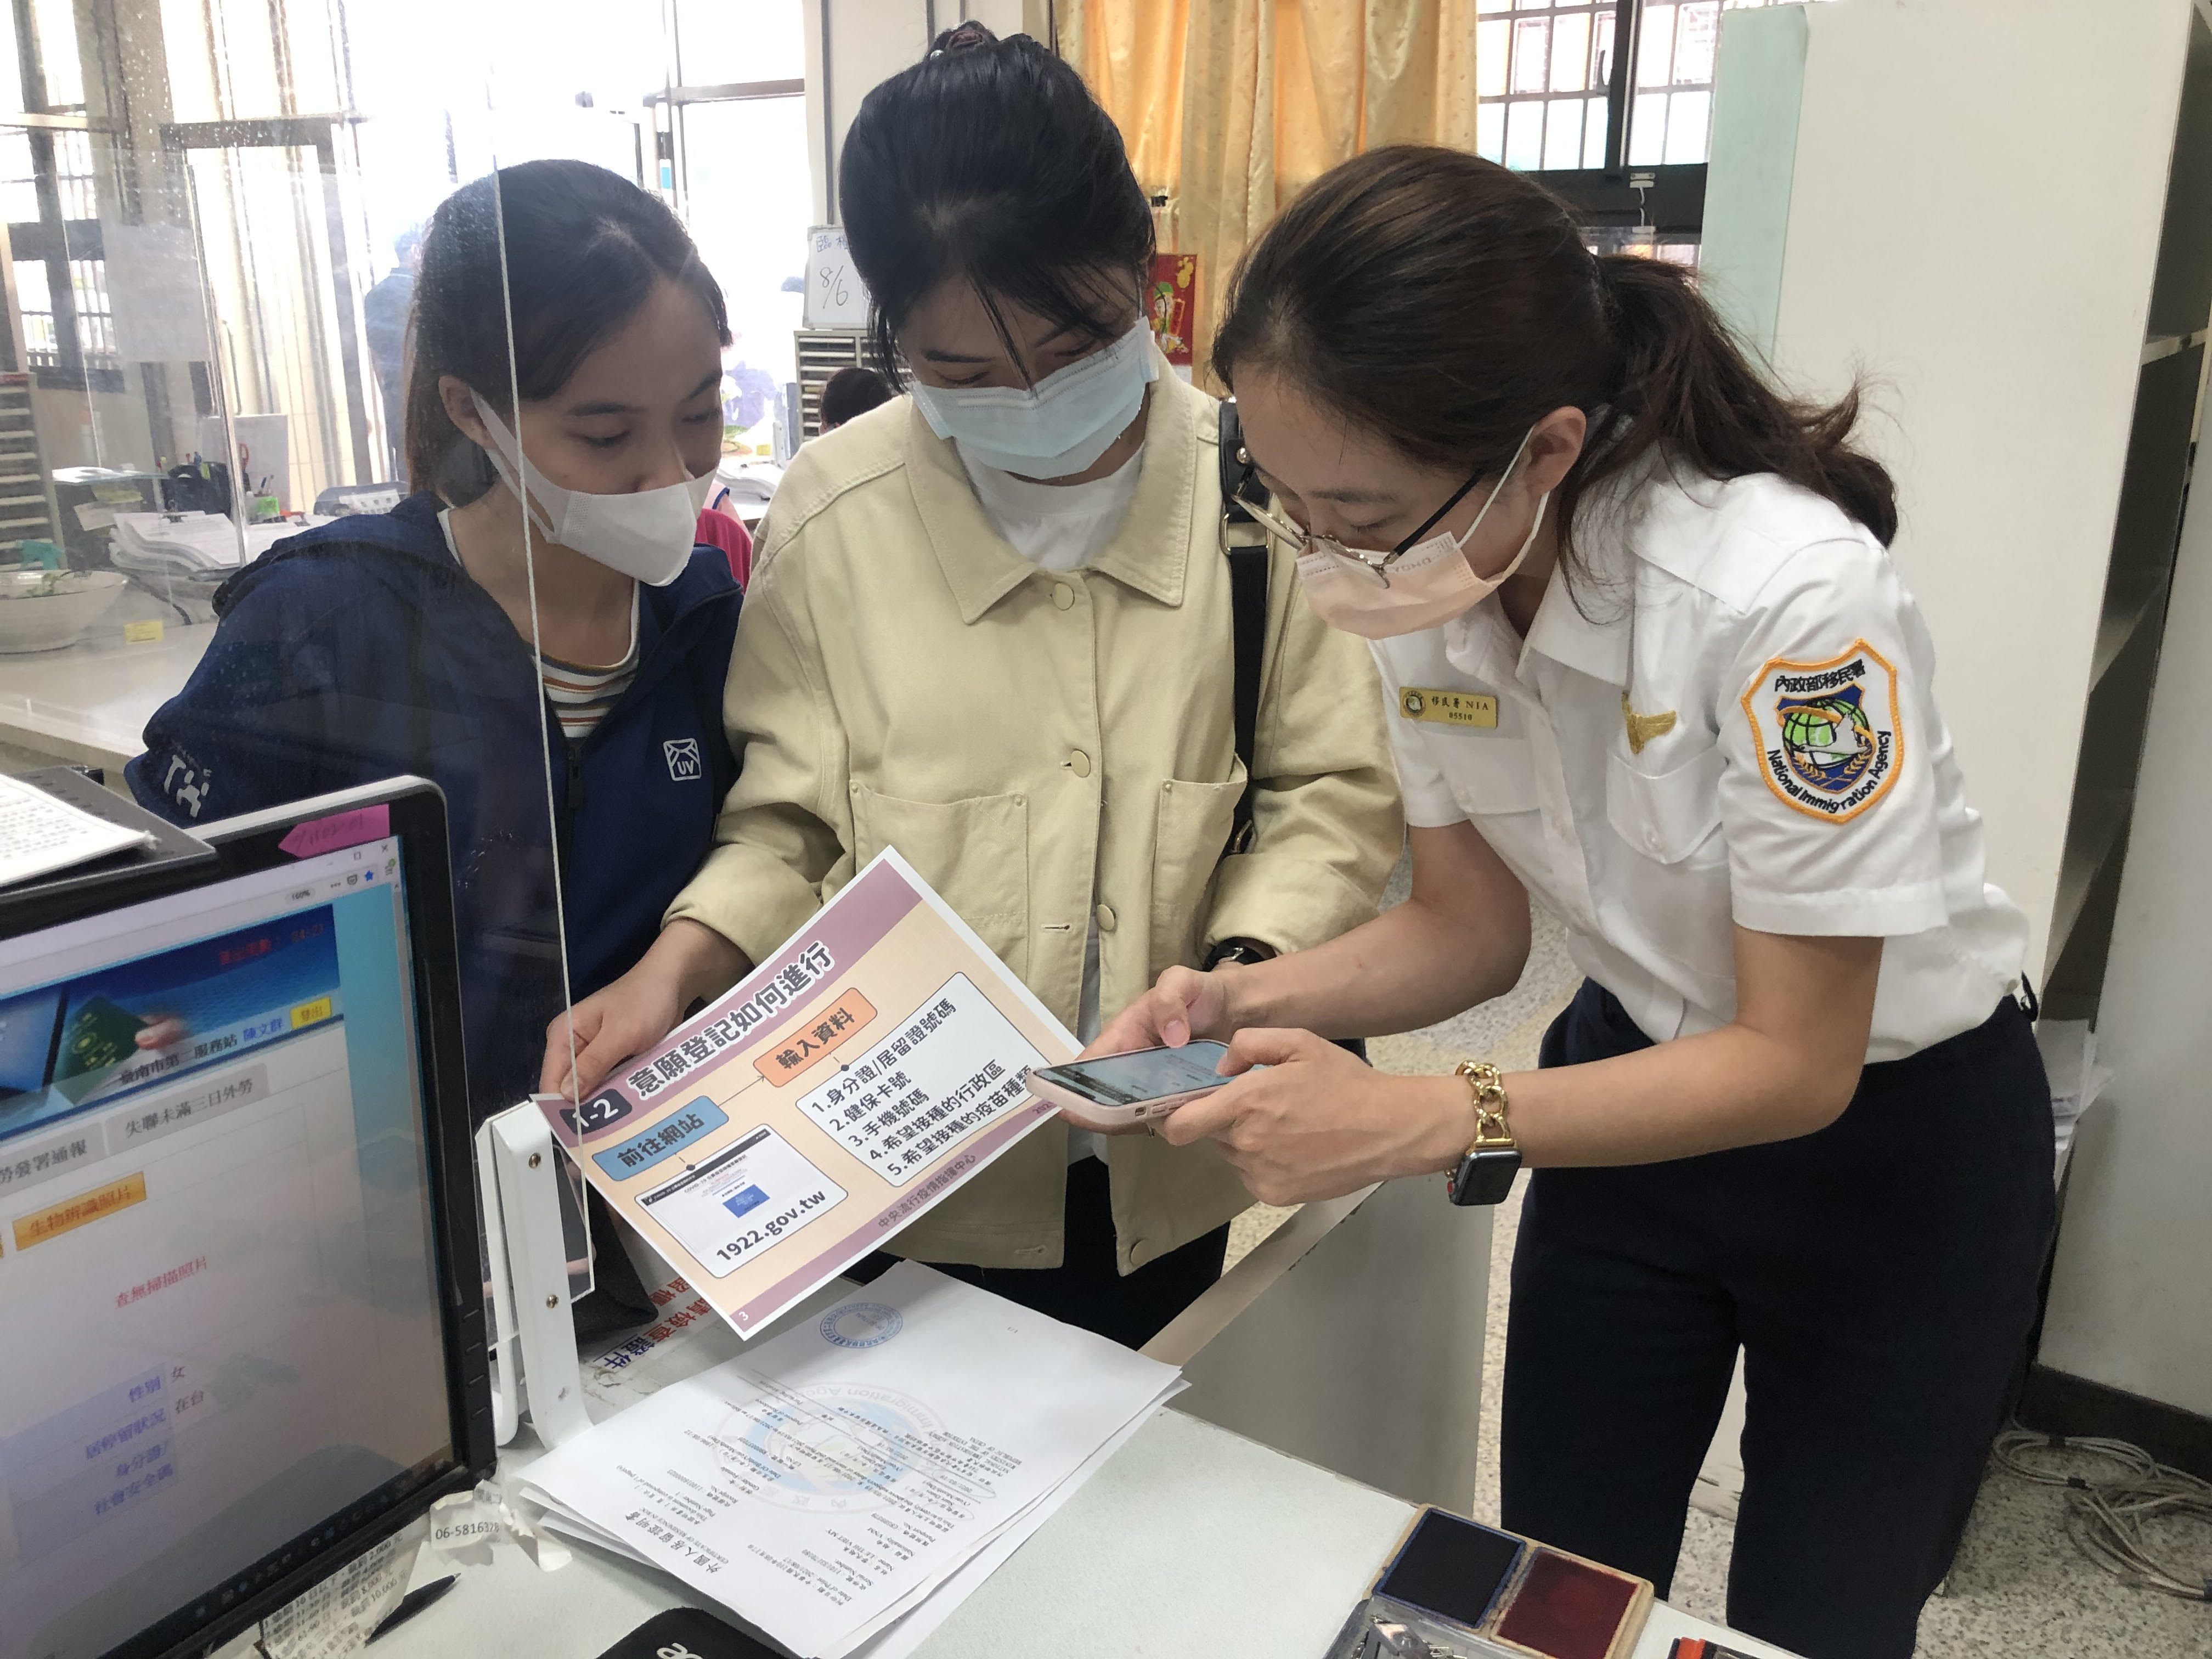 The NIA service station assists new immigrants in registering for vaccines through the online system. (Photo / Provided by the NIA 2nd Tainan City Service Center)